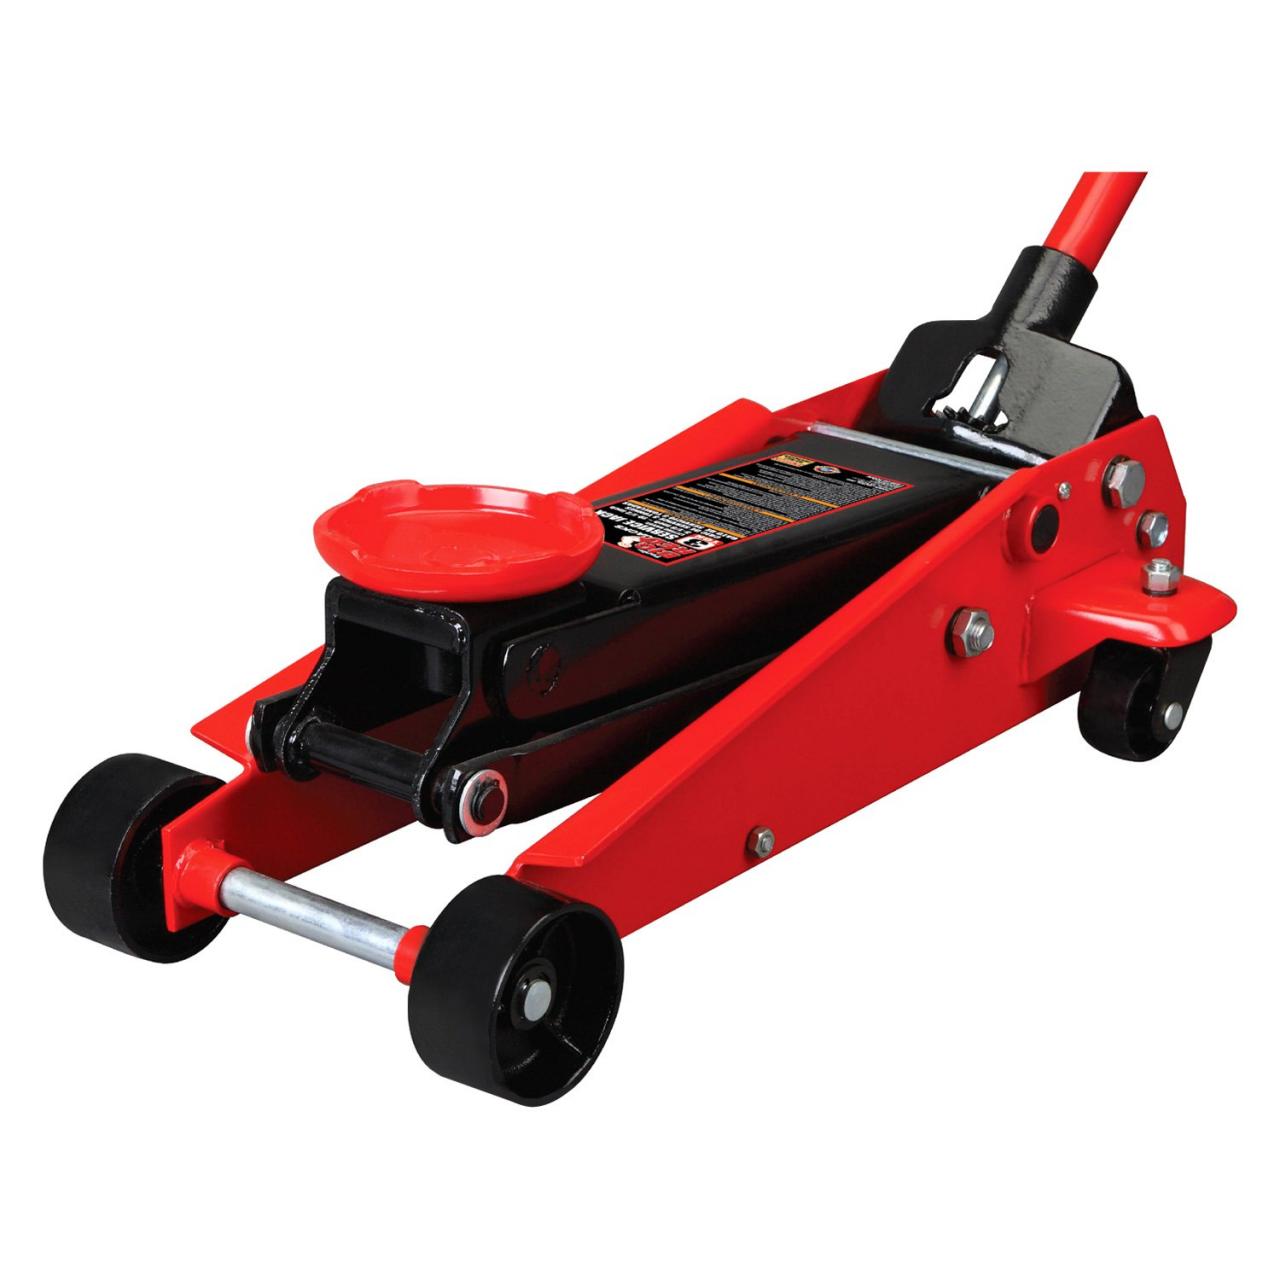 BIG RED T82040 Torin Hydraulic Trolley Floor Service/Floor Combo with 2  Jack Stands and Rolling Garage/Shop Creeper, 2 Ton (4,000 lb) Capacity, Red-  Buy Online in Japan at desertcart.jp. ProductId : 6509239.